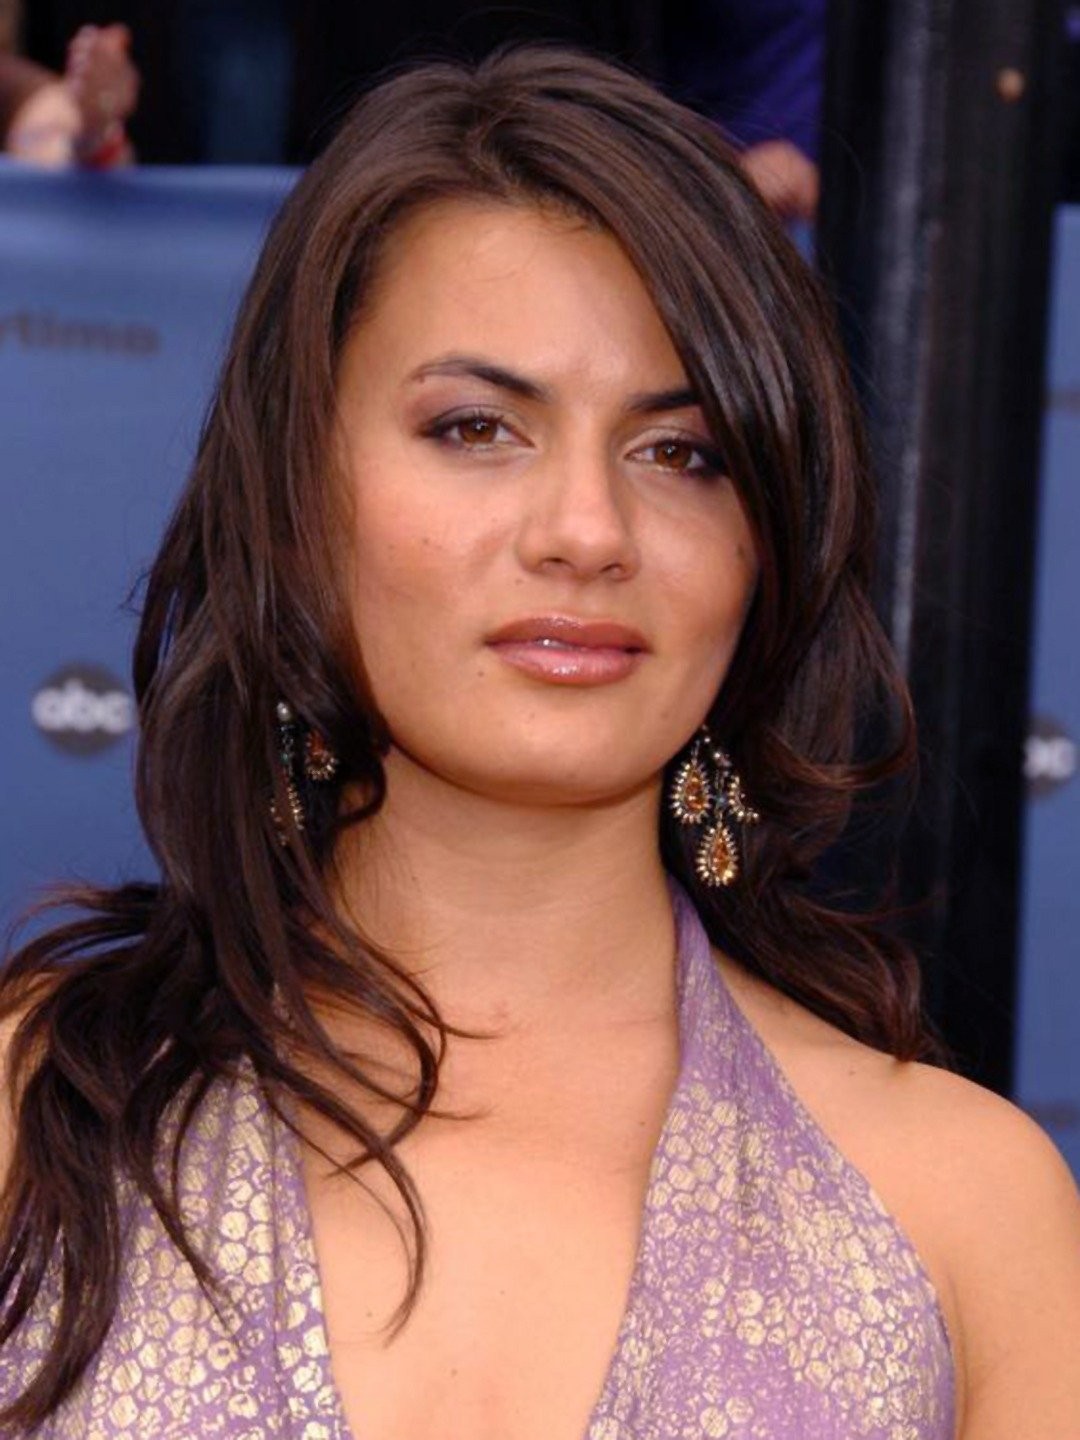 Michelle belegrin movies and tv shows